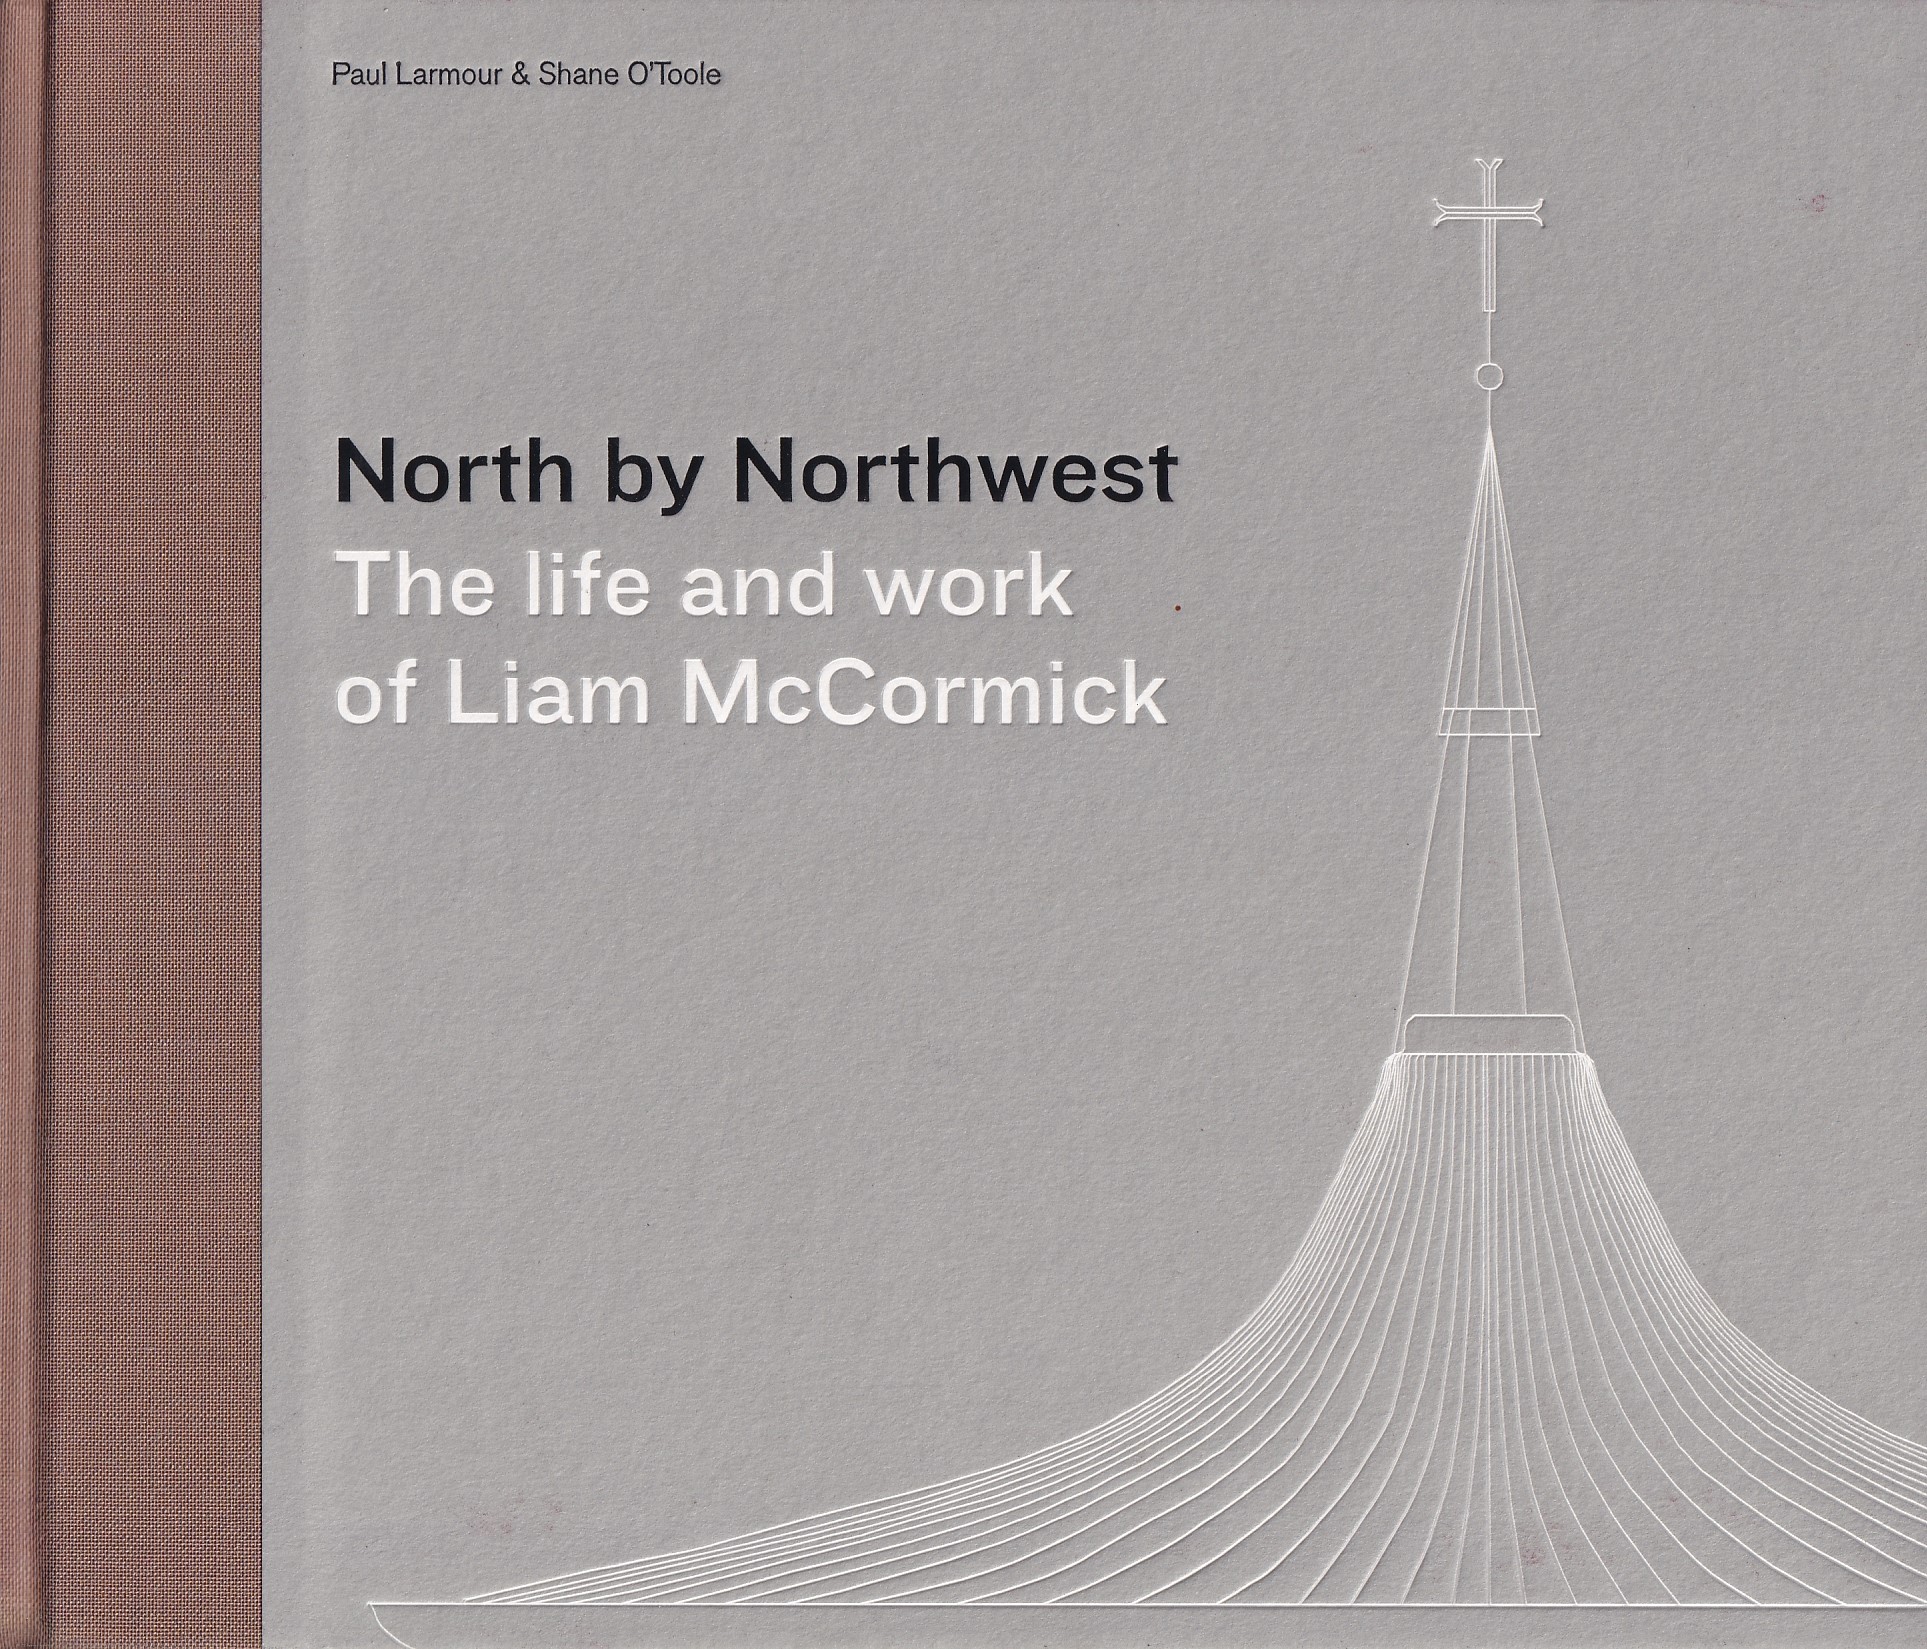 North by Northwest: The life and work of Liam McCormick | Paul Larmour & Shane O'Toole | Charlie Byrne's